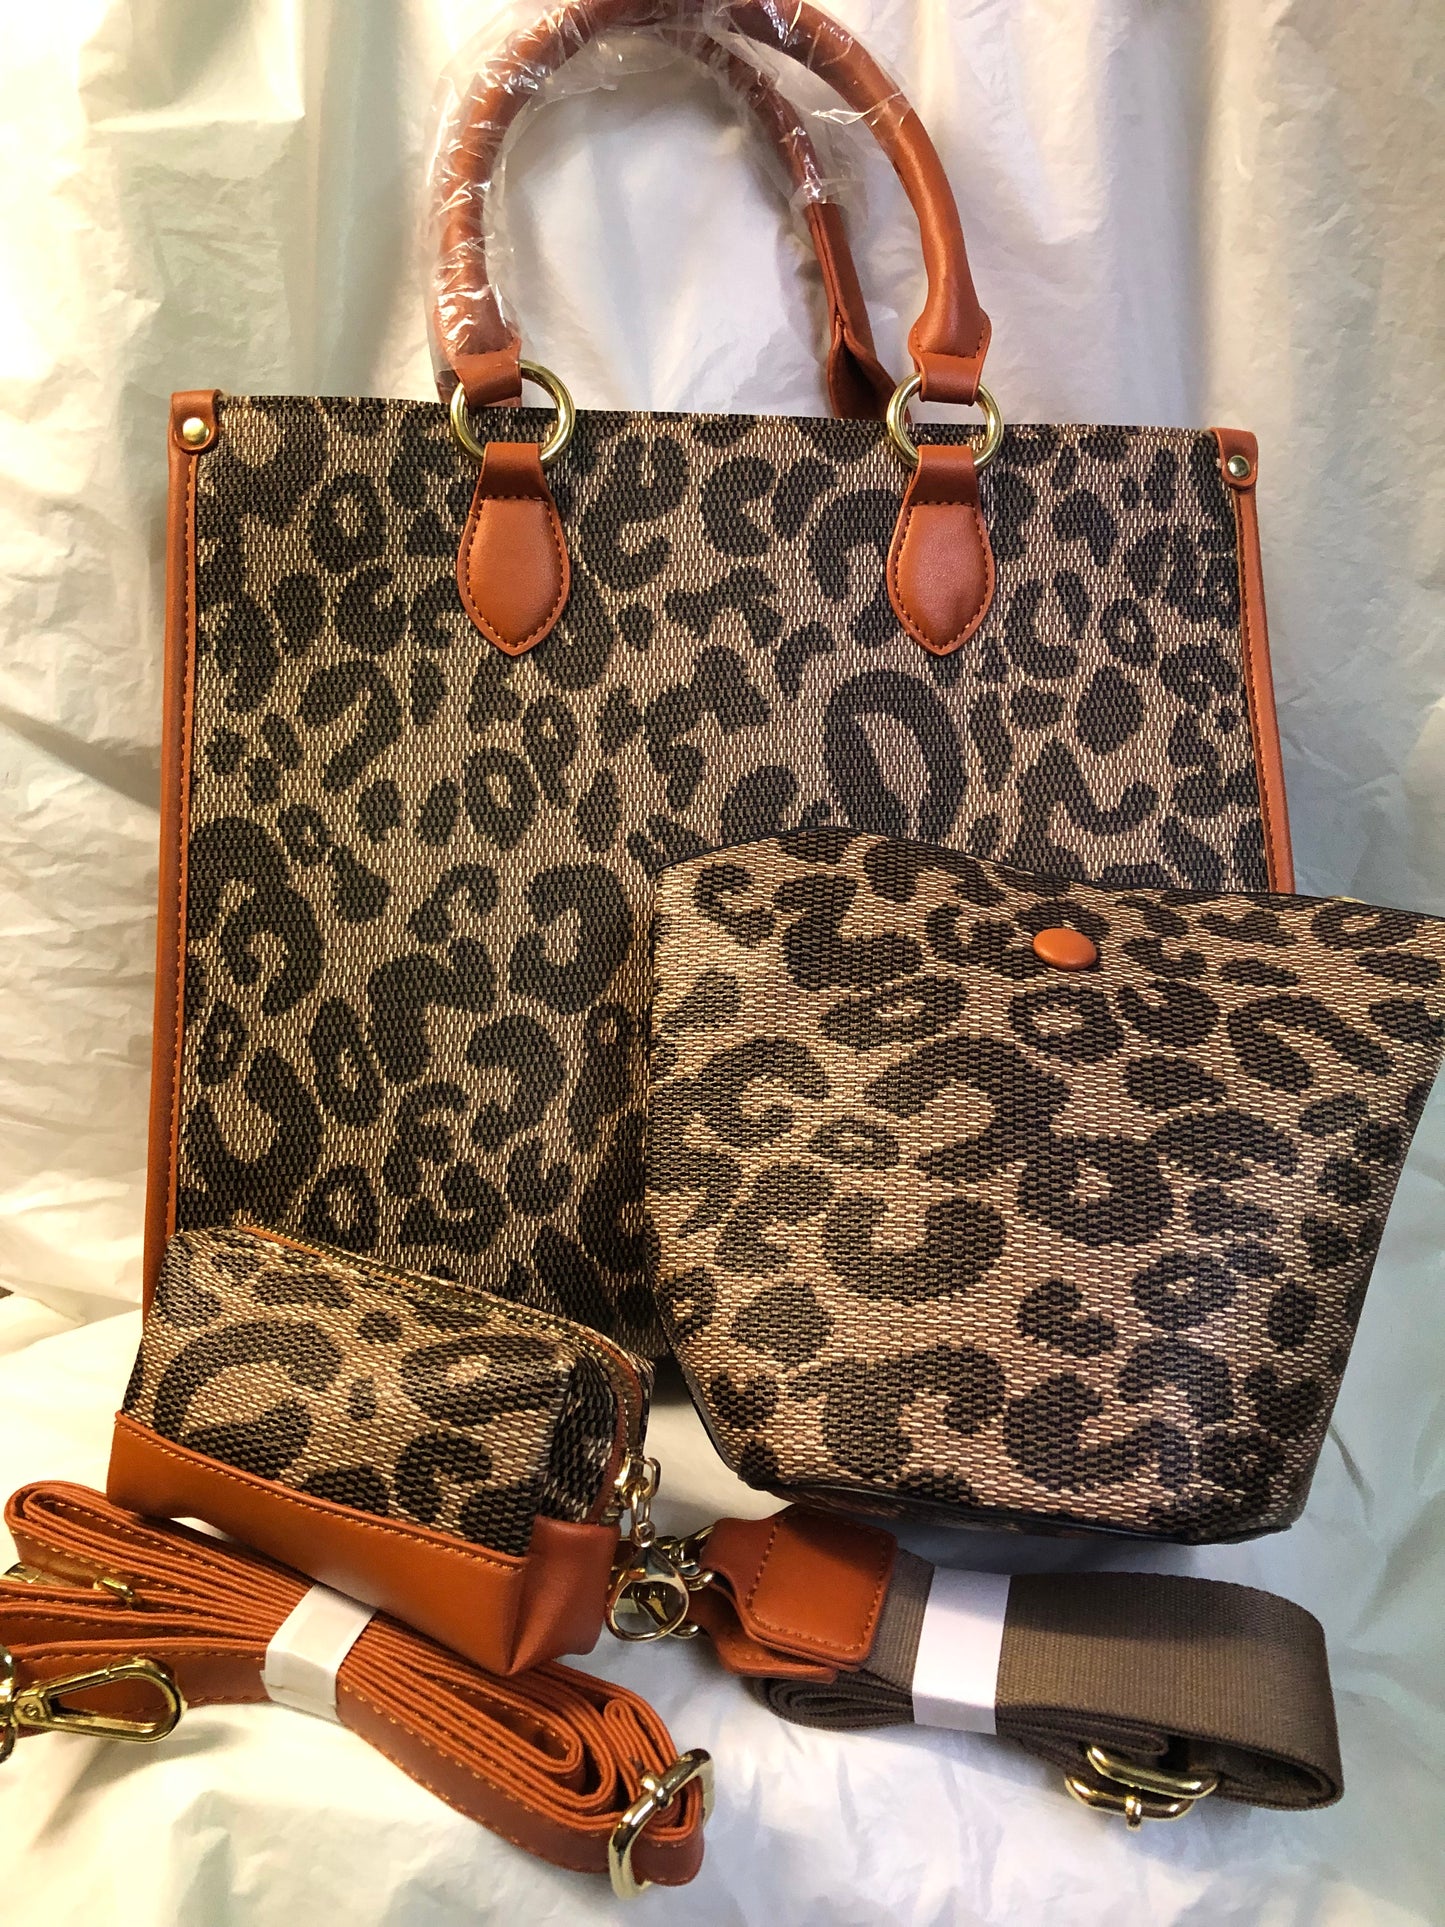 Woman Fabulous Tote 3in 1 Crossbody Bag Cheetah PrintTan Trim "New Arrival" Just In Time For Mother's Day